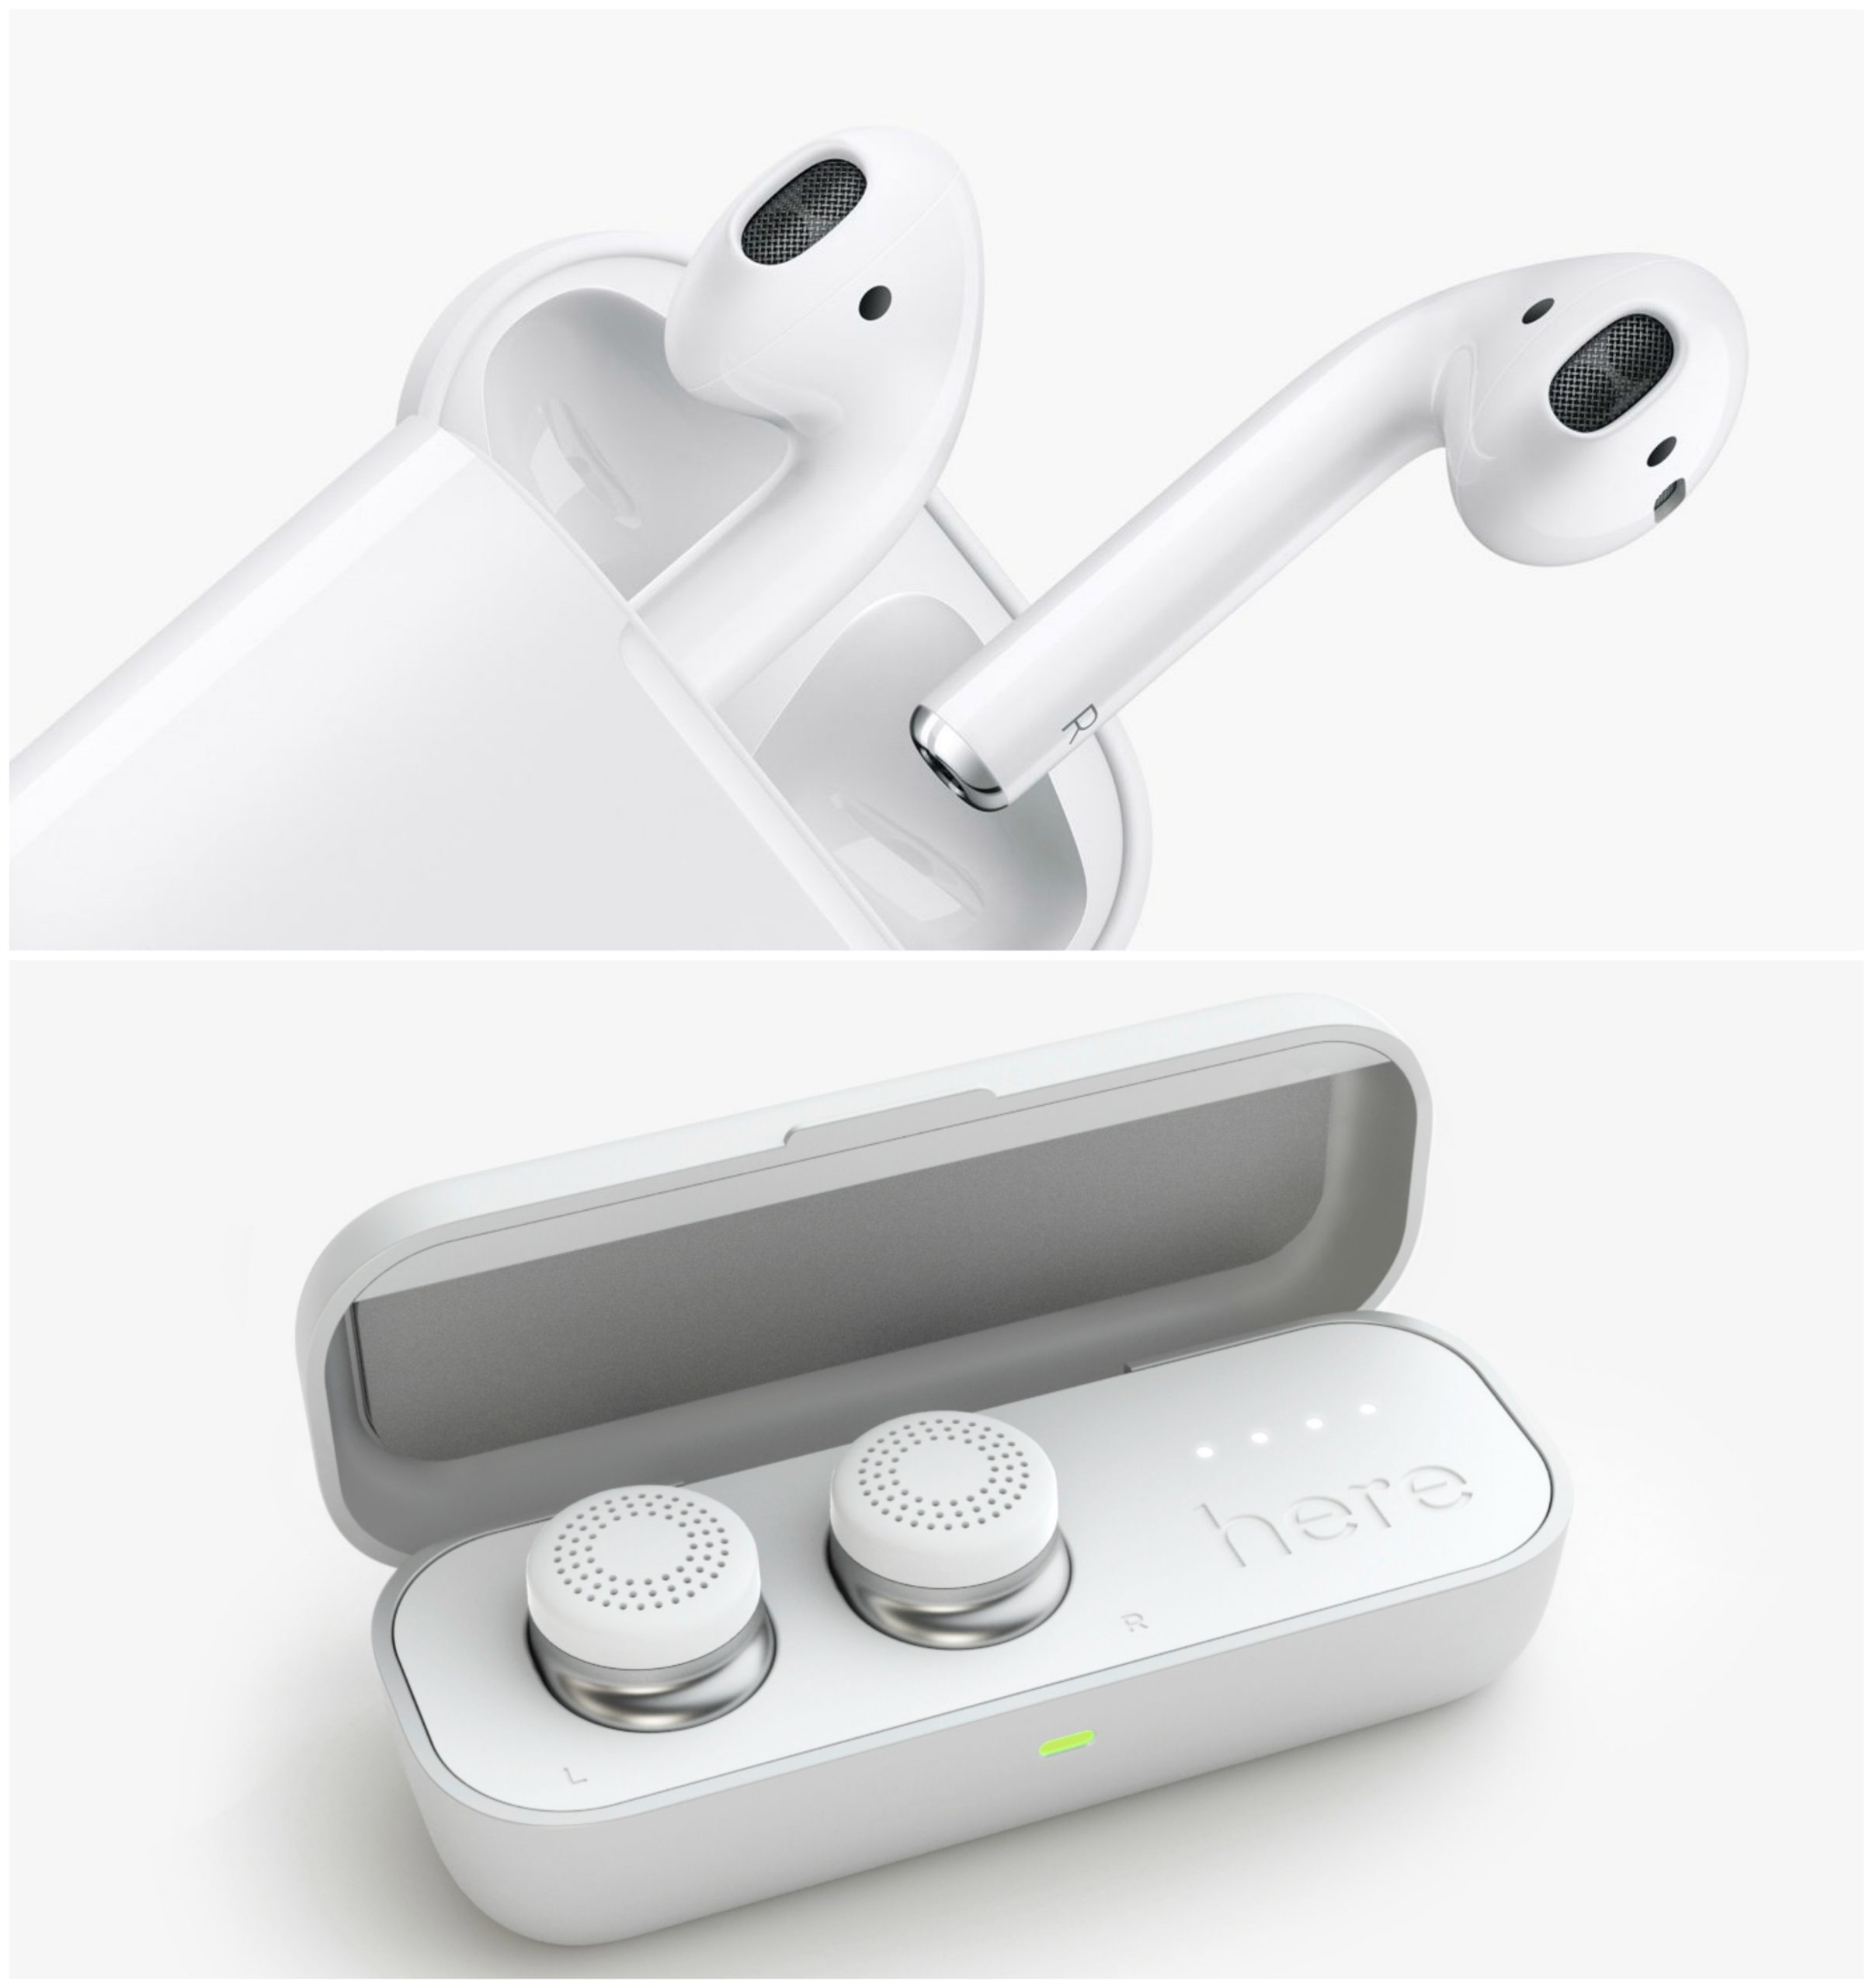 Spy on Conversations Behind you with Wireless Earbuds?